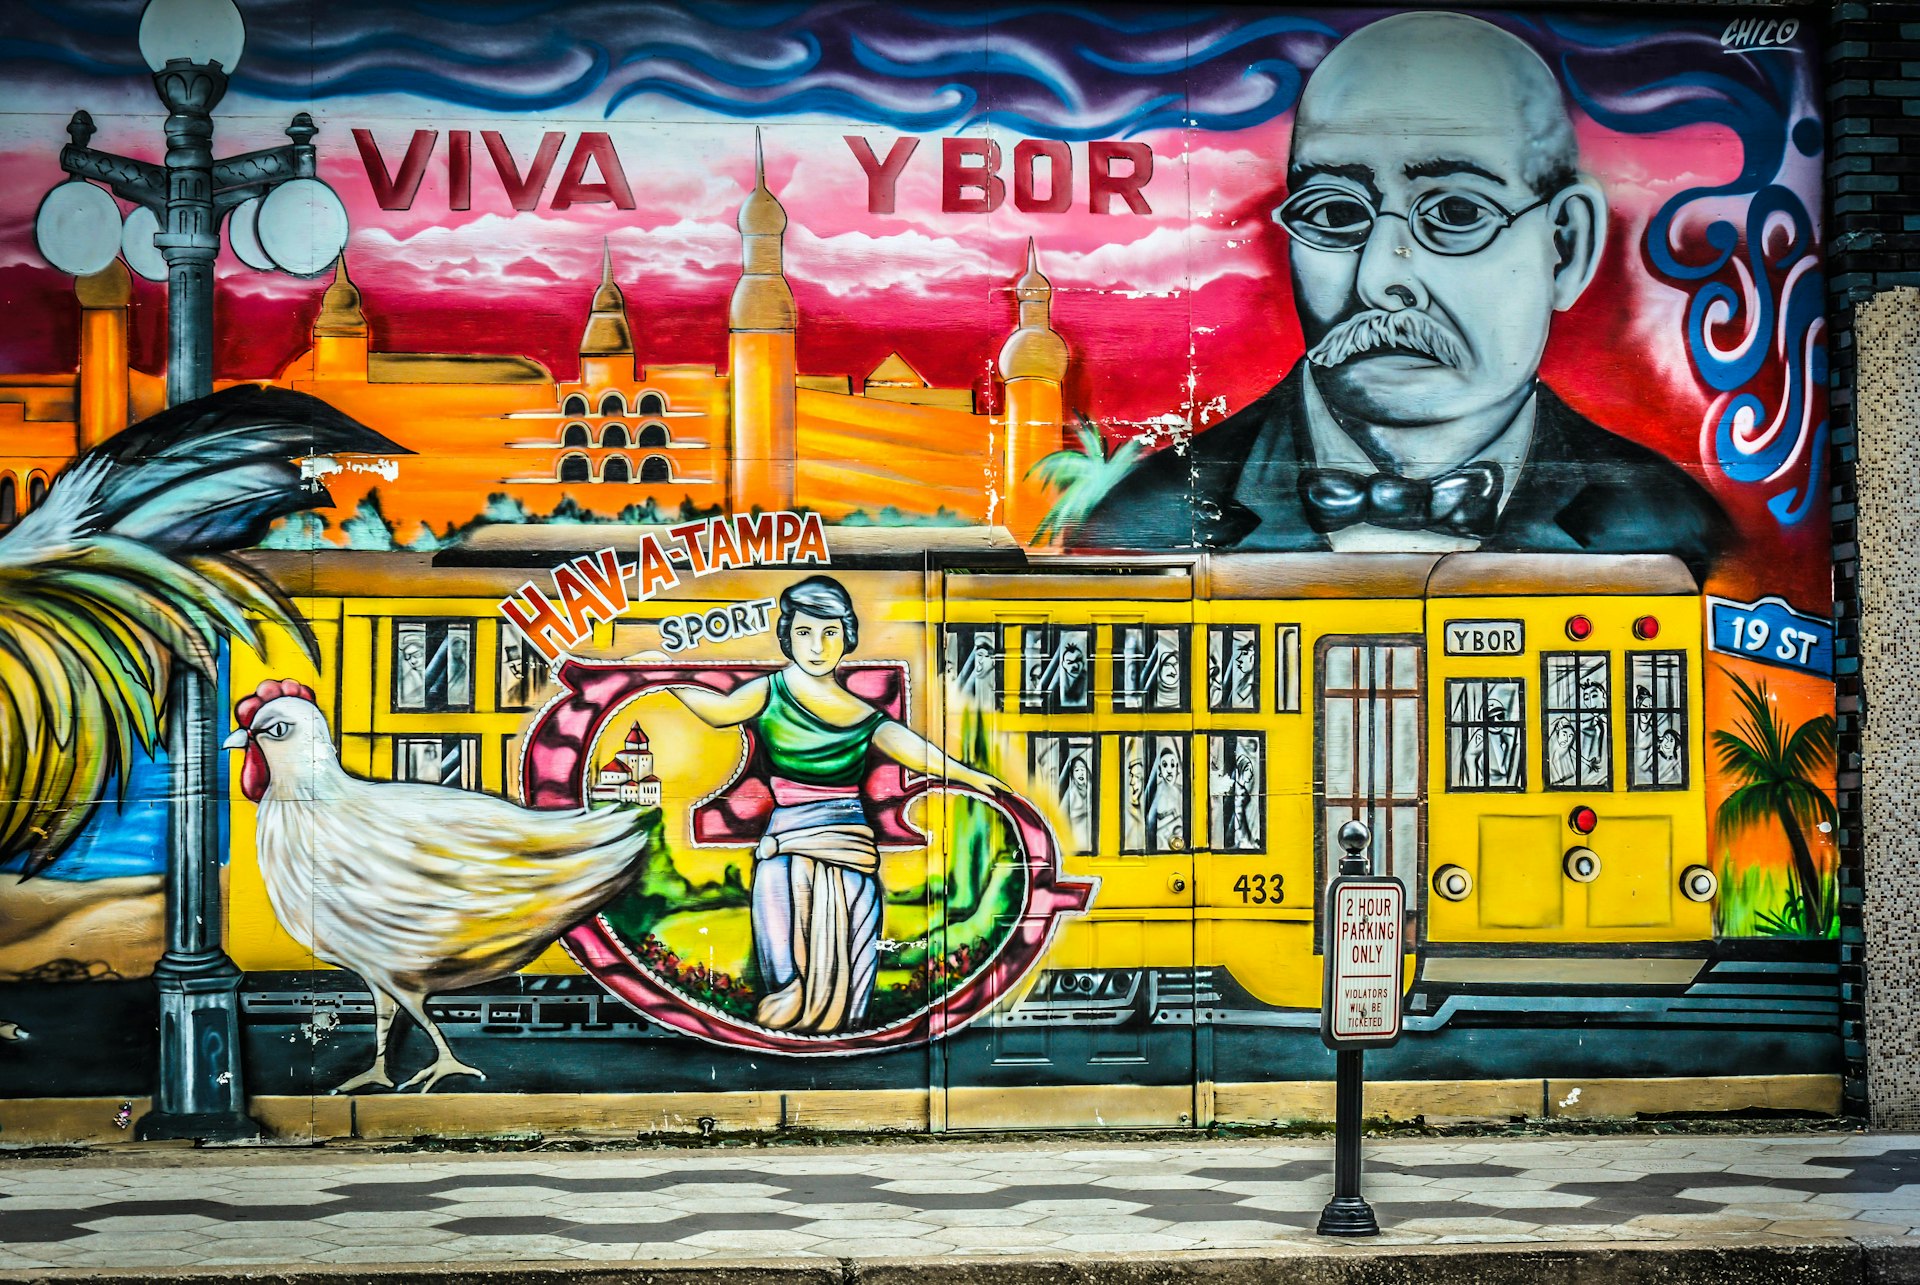 Street art, murals & Graphics in Ybor City, FL, the former Cigar Capital of the world settled by Cuban & Spanish immigrants